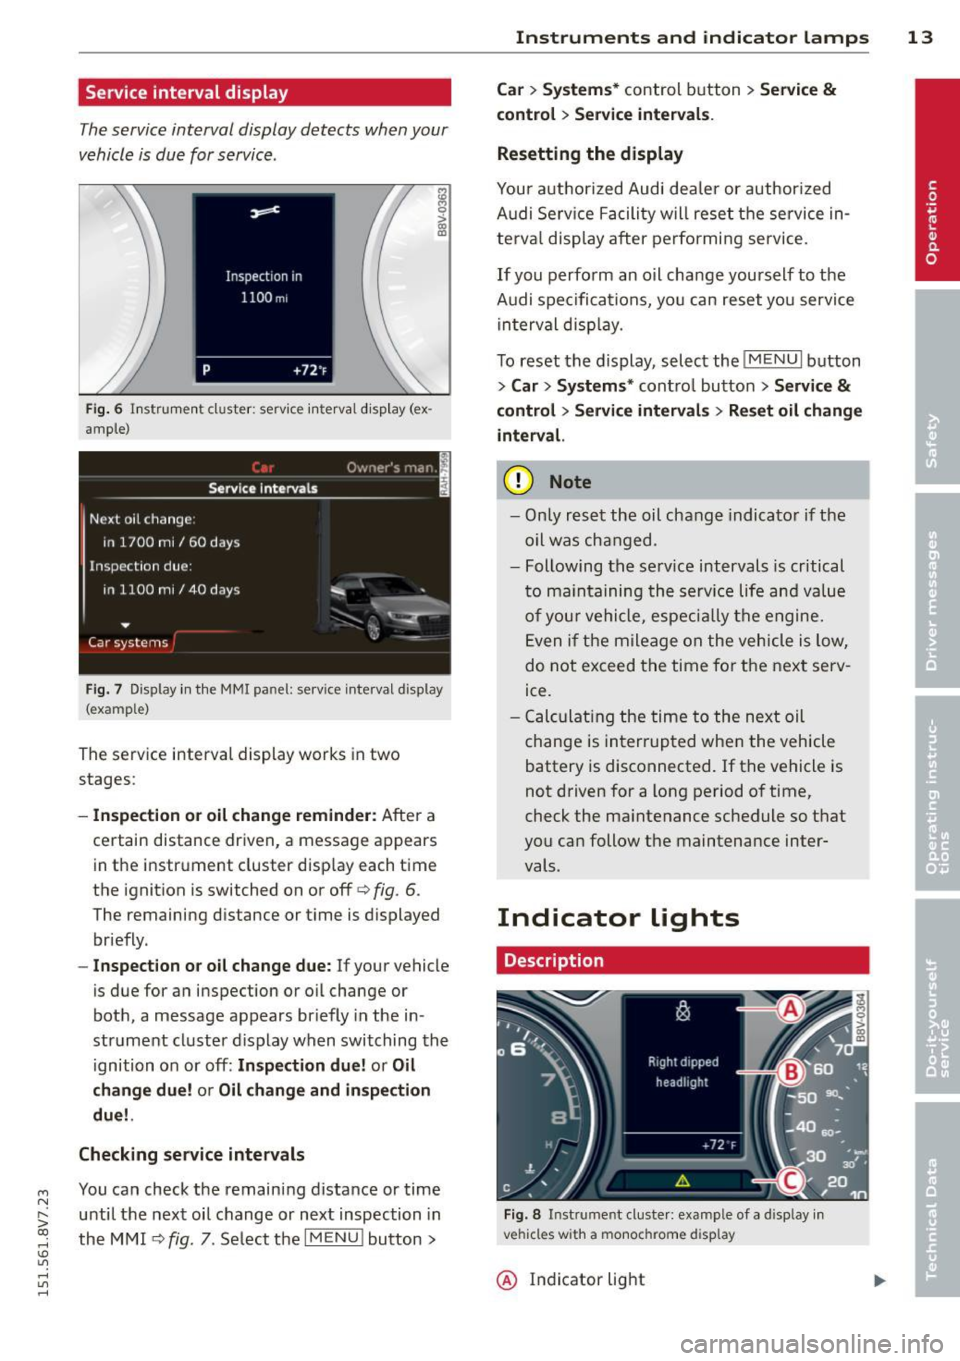 AUDI A3 CABRIOLET 2015  Owners Manual ...., 
N 
r--. > co 
rl I.O 
" rl 
" rl 
Service  interval  display 
The service  interval  display  detects  when your 
v e hicle  is due  for  service . 
Fig.  6  In str um en t cluste r: serv ice